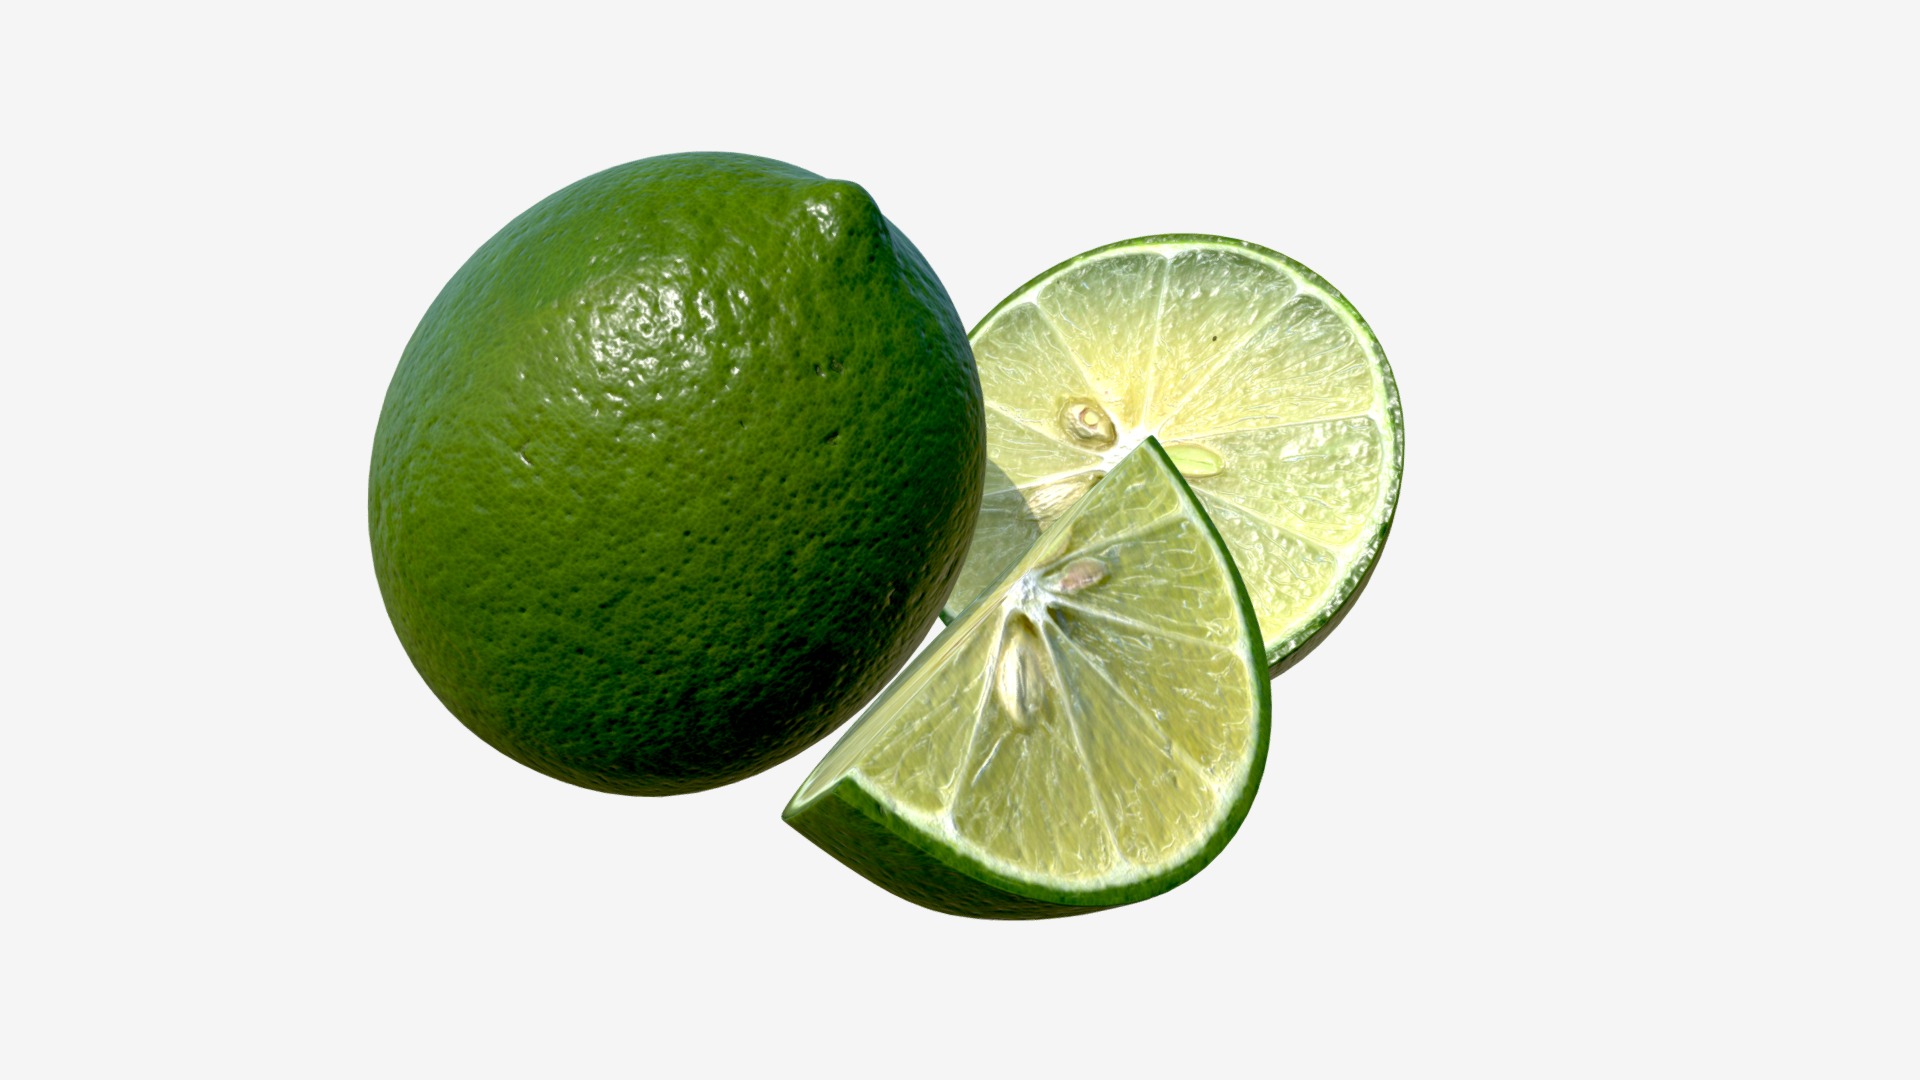 3D model Citrus lime fruit - This is a 3D model of the Citrus lime fruit. The 3D model is about a lime with a slice cut out.